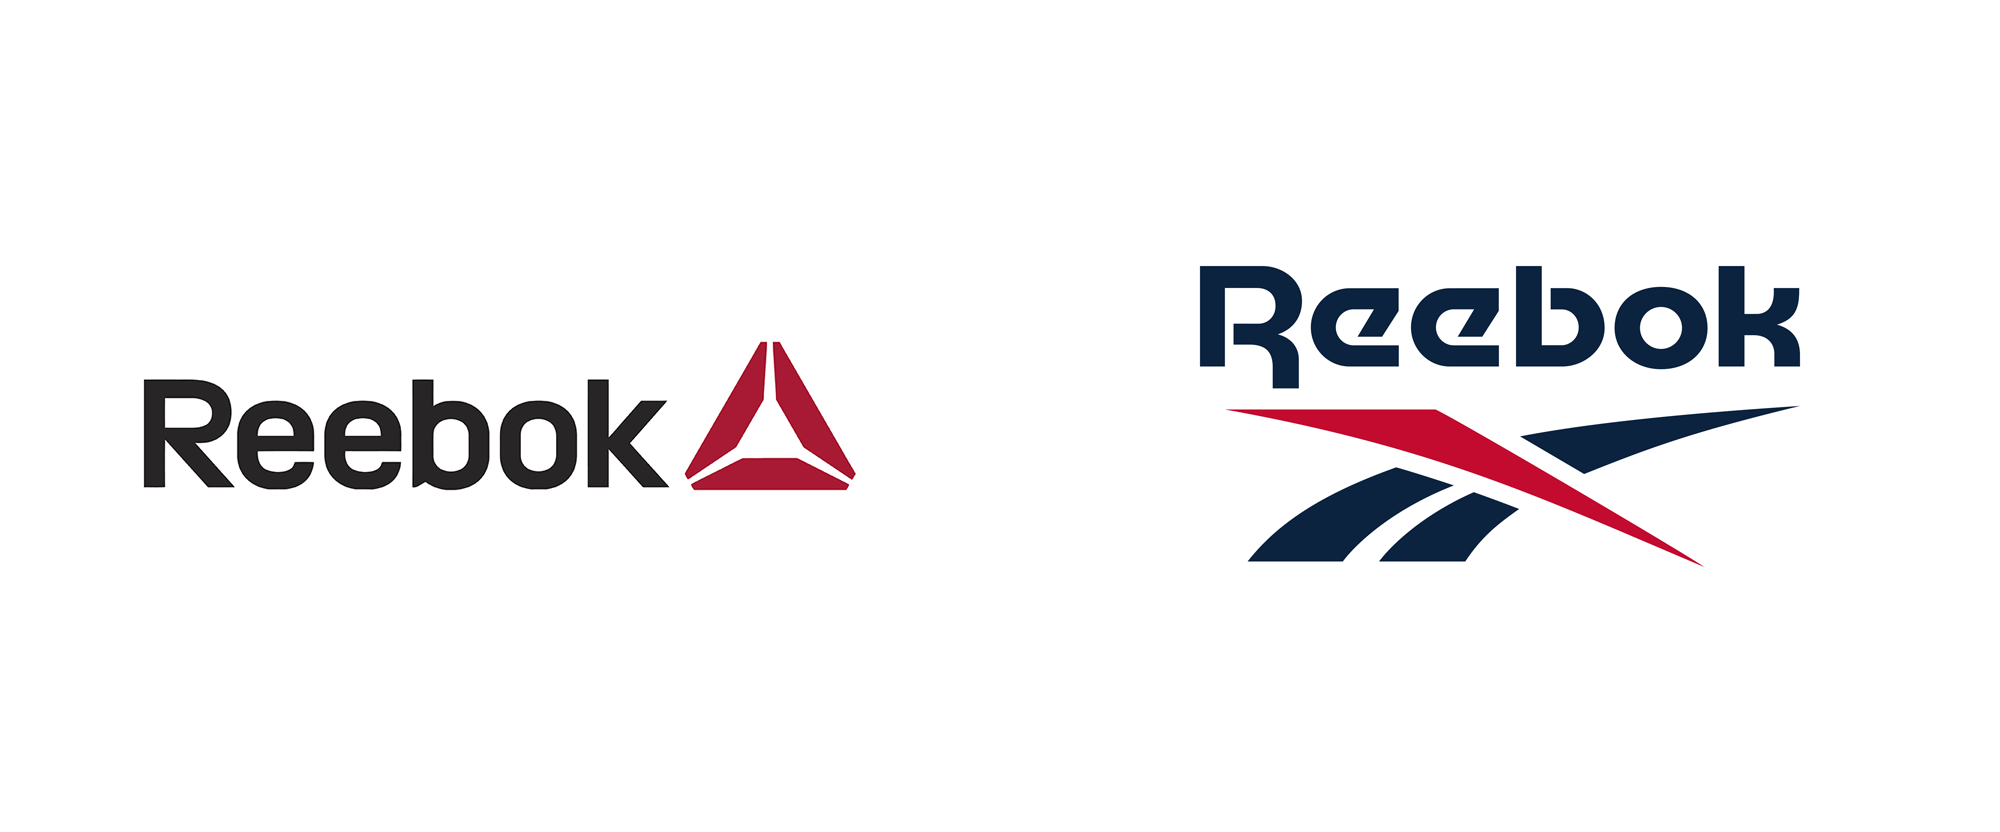 New Logo and Identity for Reebok done 